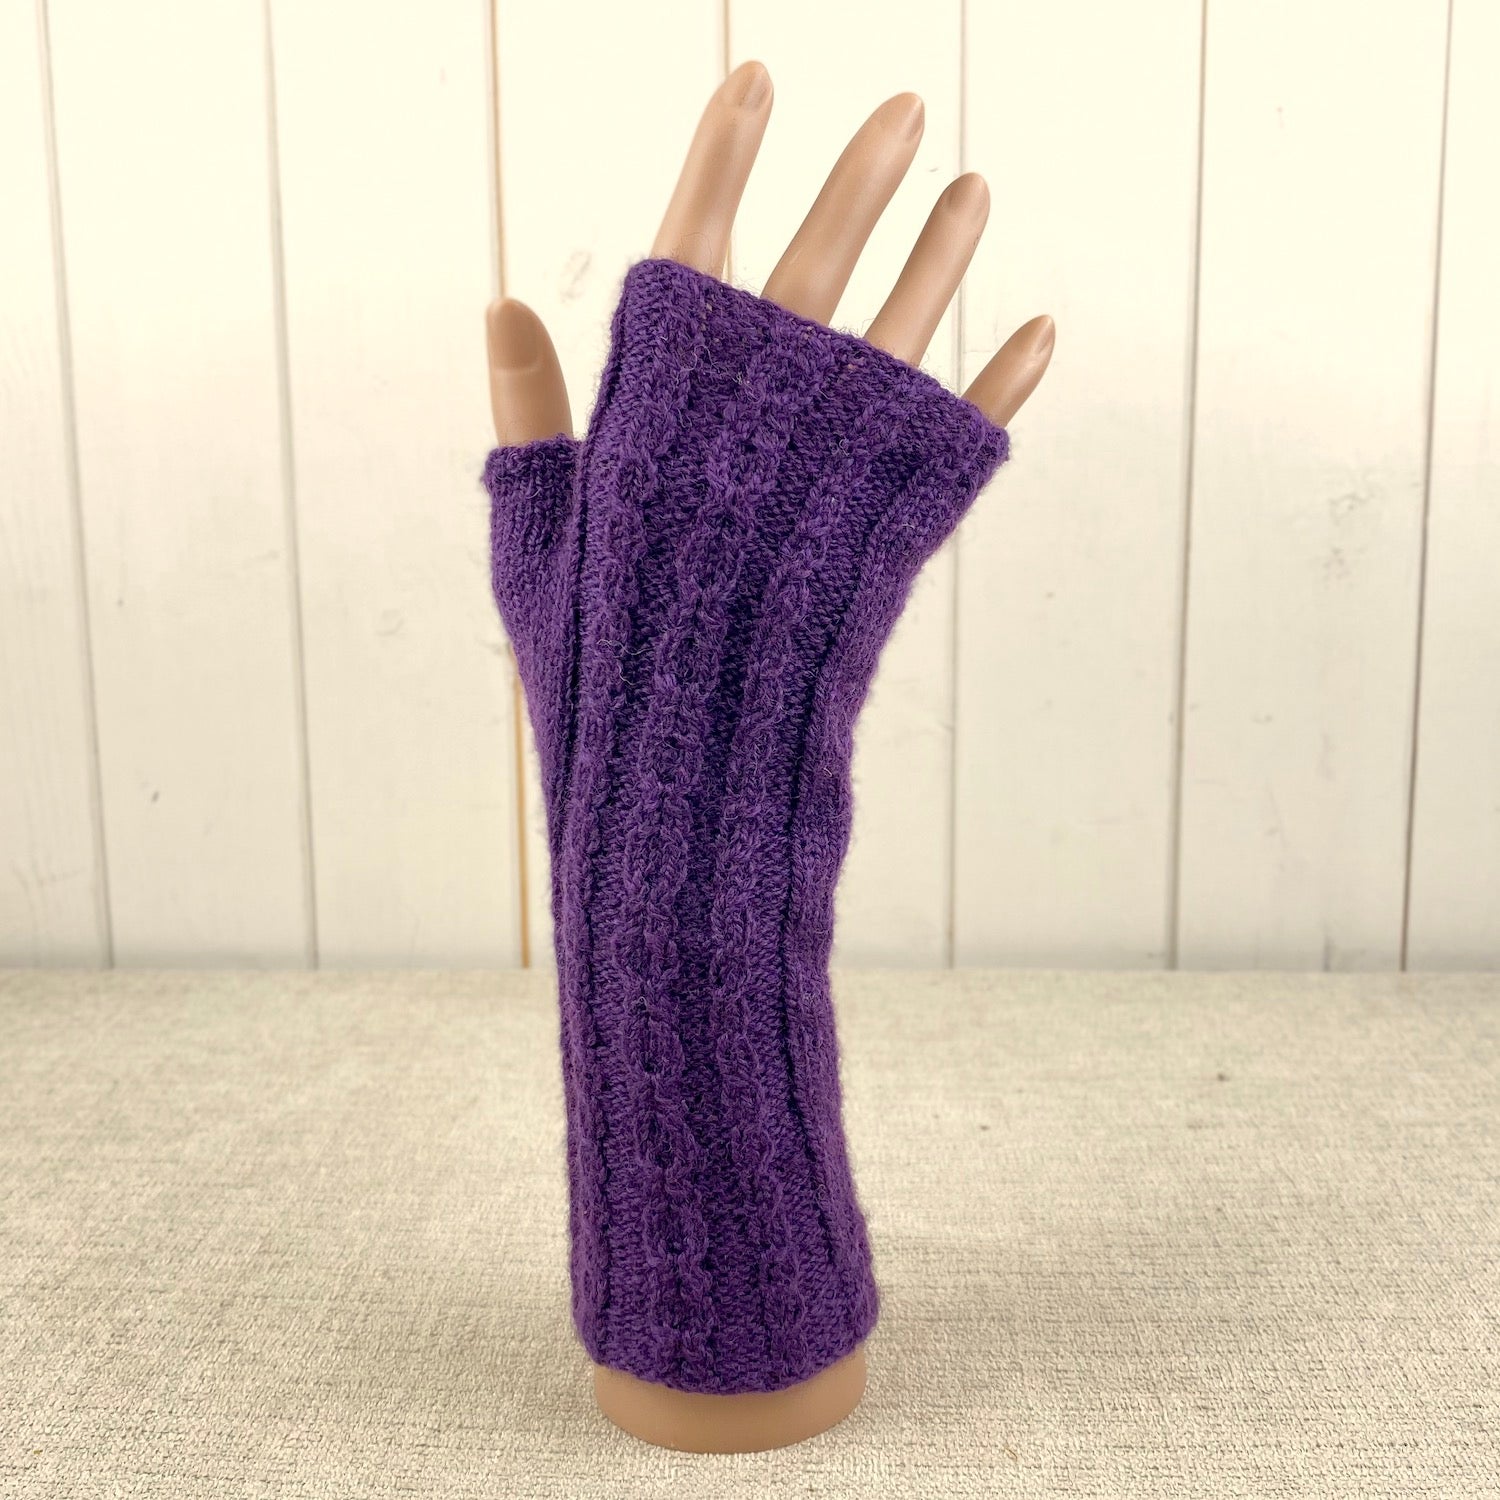 Cable Design Handwarmers Knitting Kit